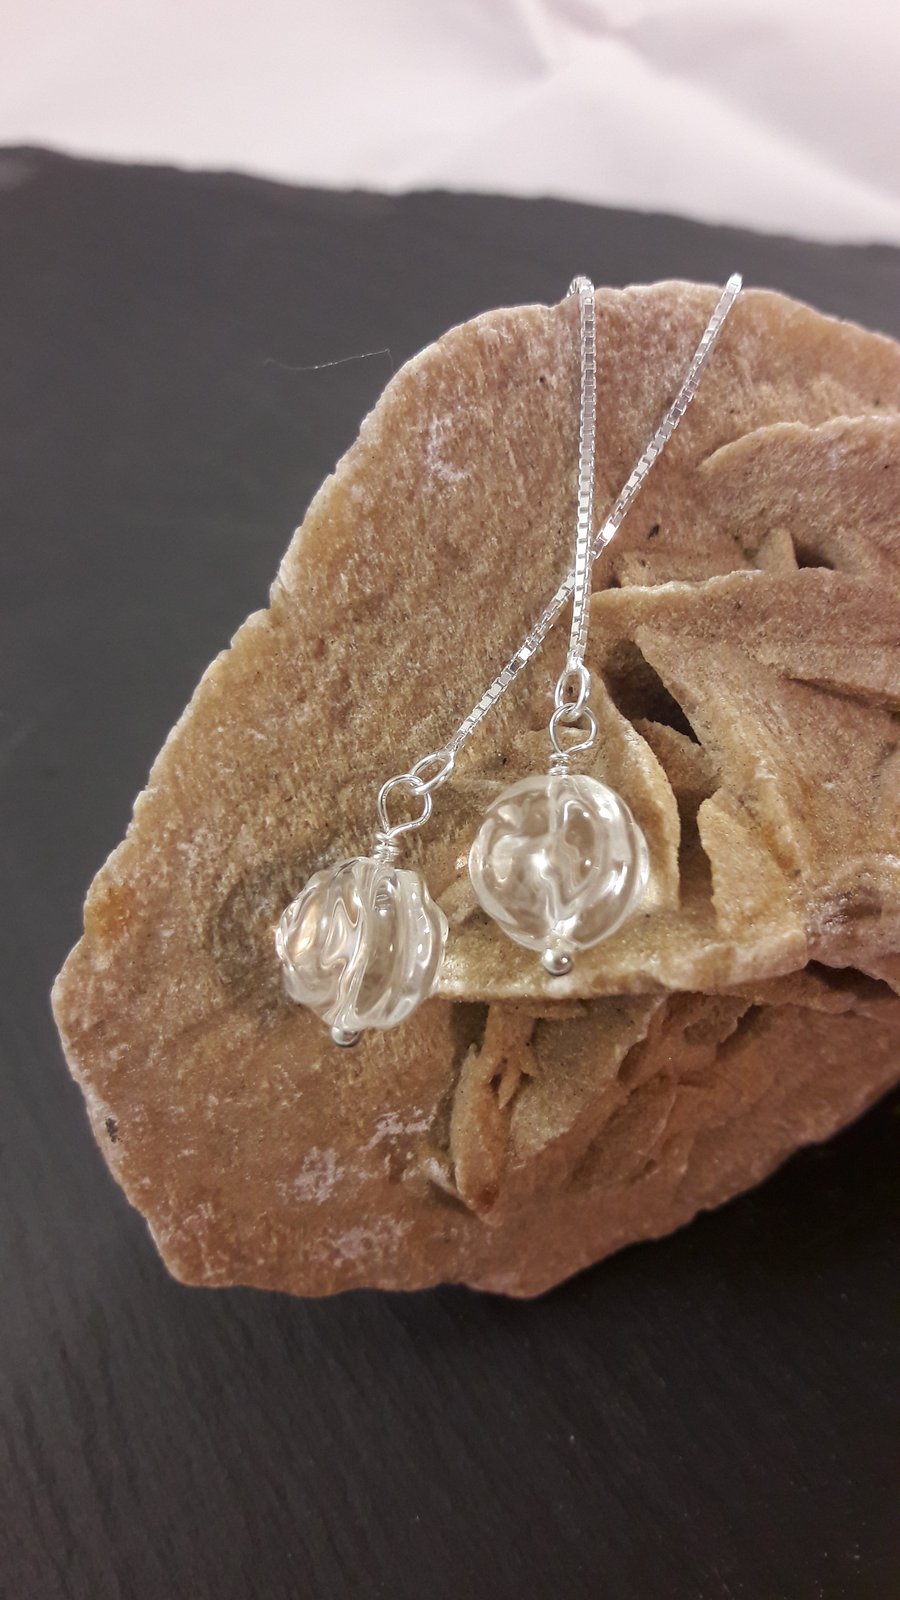 Clear Quartz Carved Rose Pull Through Sterling Silver Earrings